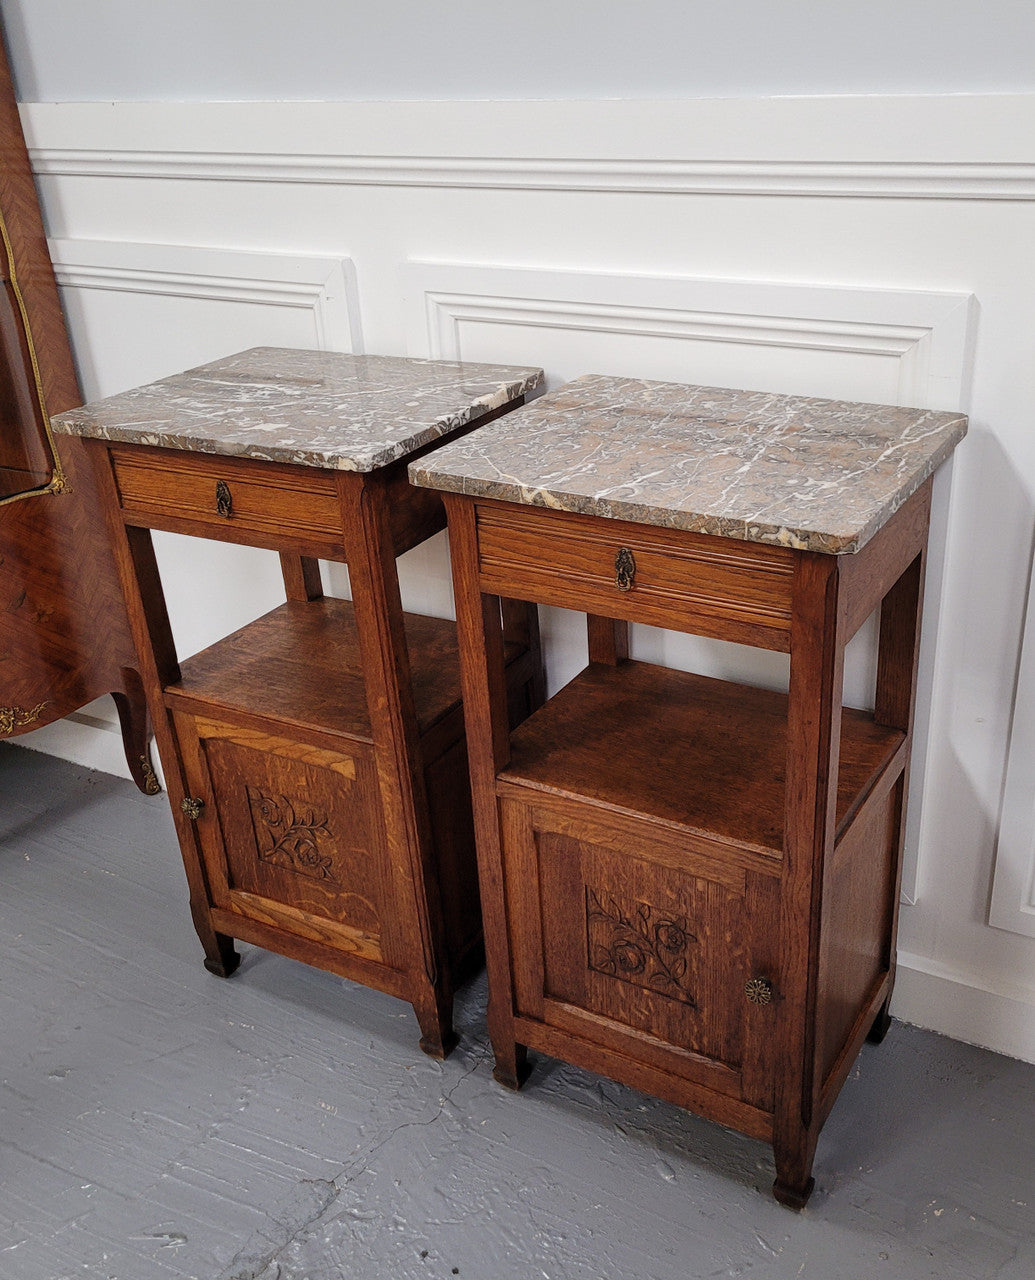 Pair of French Oak Arts & Crafts style marble top bedside cabinets. They have lovely carvings on the door, an open shelf in the middle and drawer at the top. They are in good original detailed condition.